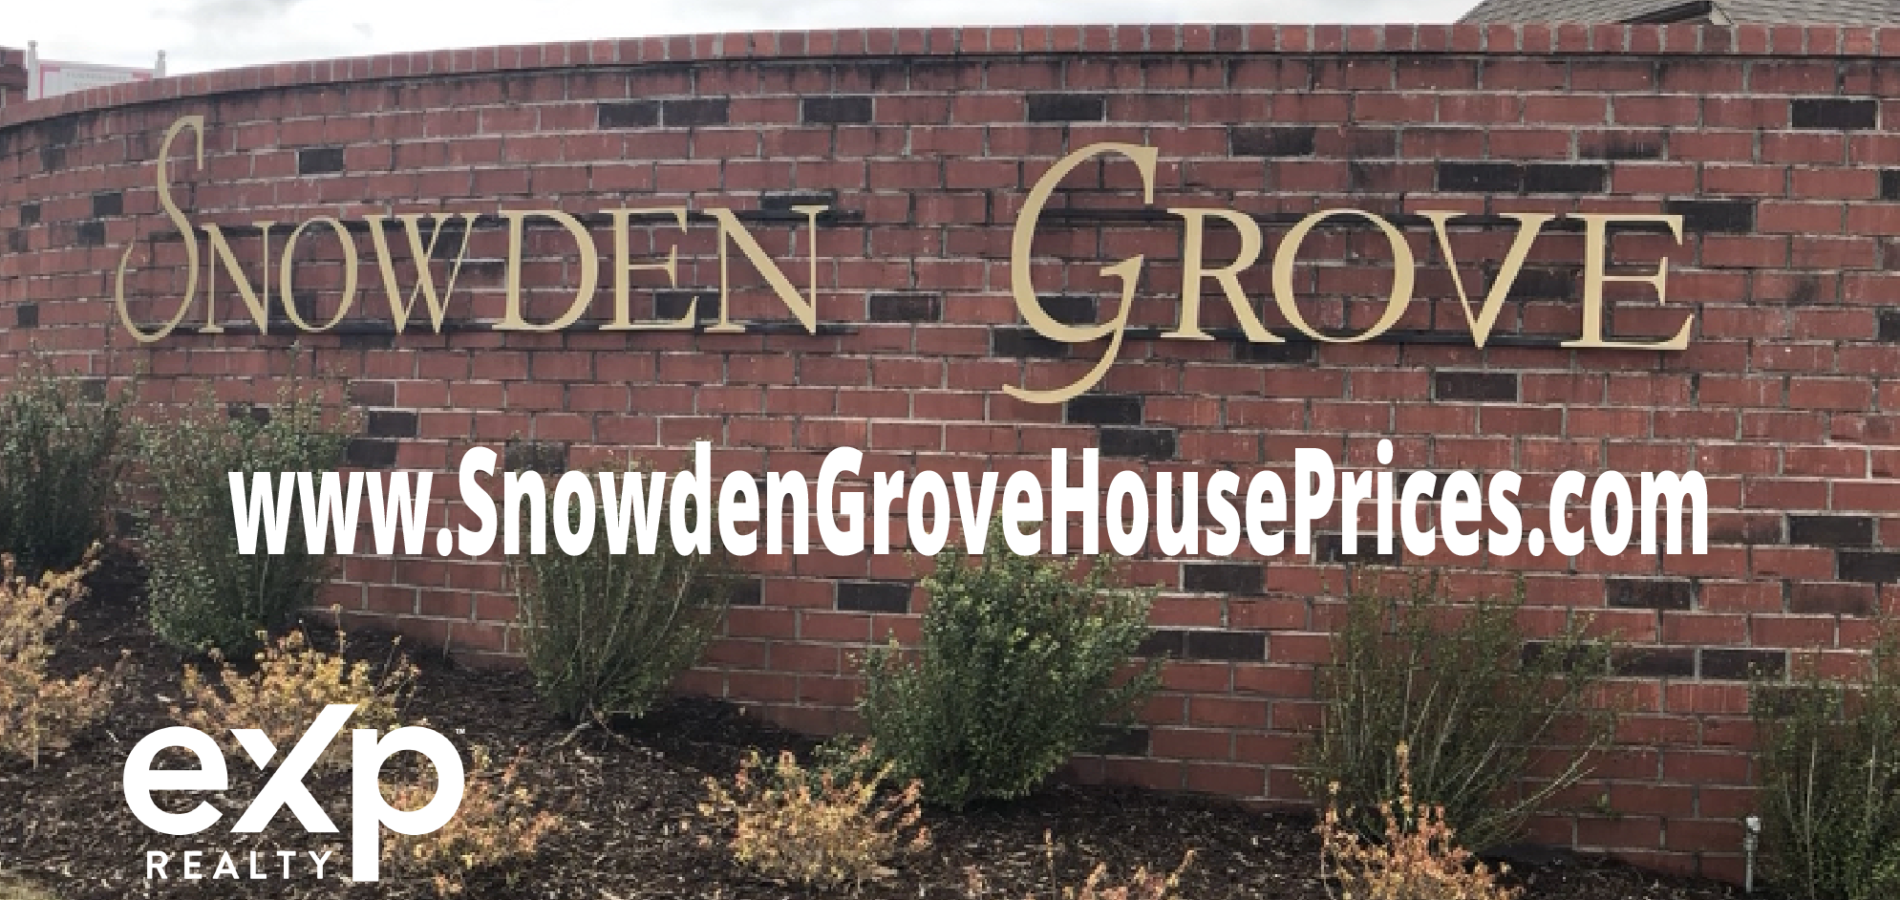 Snowden Grove House Prices TheDesotoHomeGuy